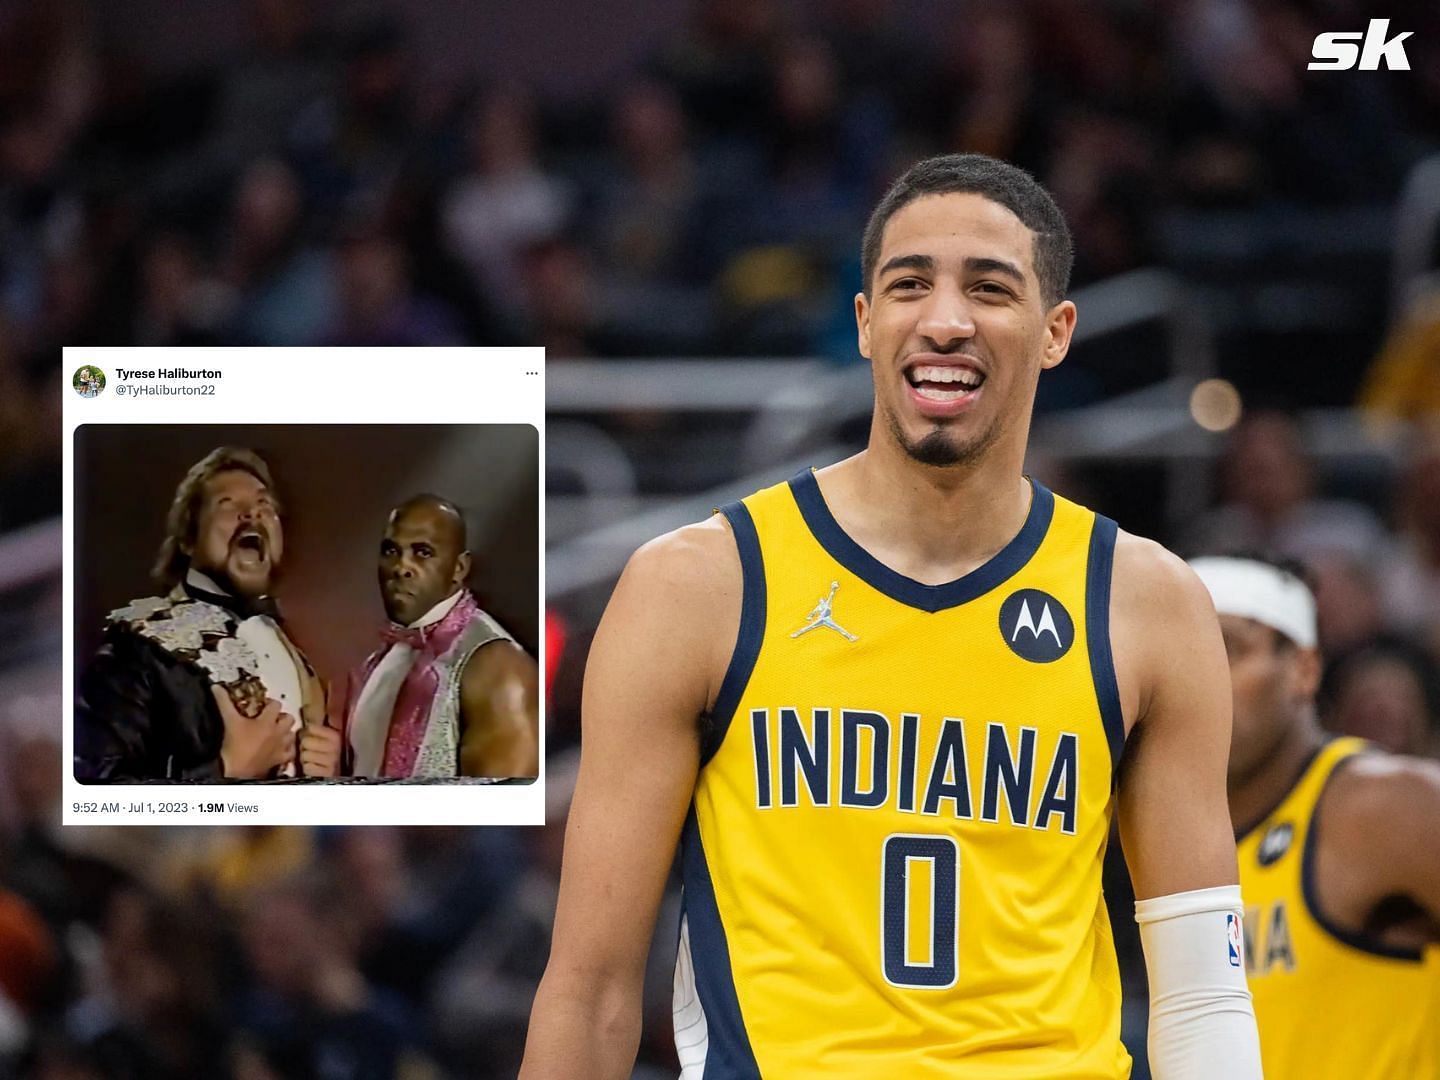 Tyrese Haliburton reacts to securing a 5-year $260M designated rookie max extension